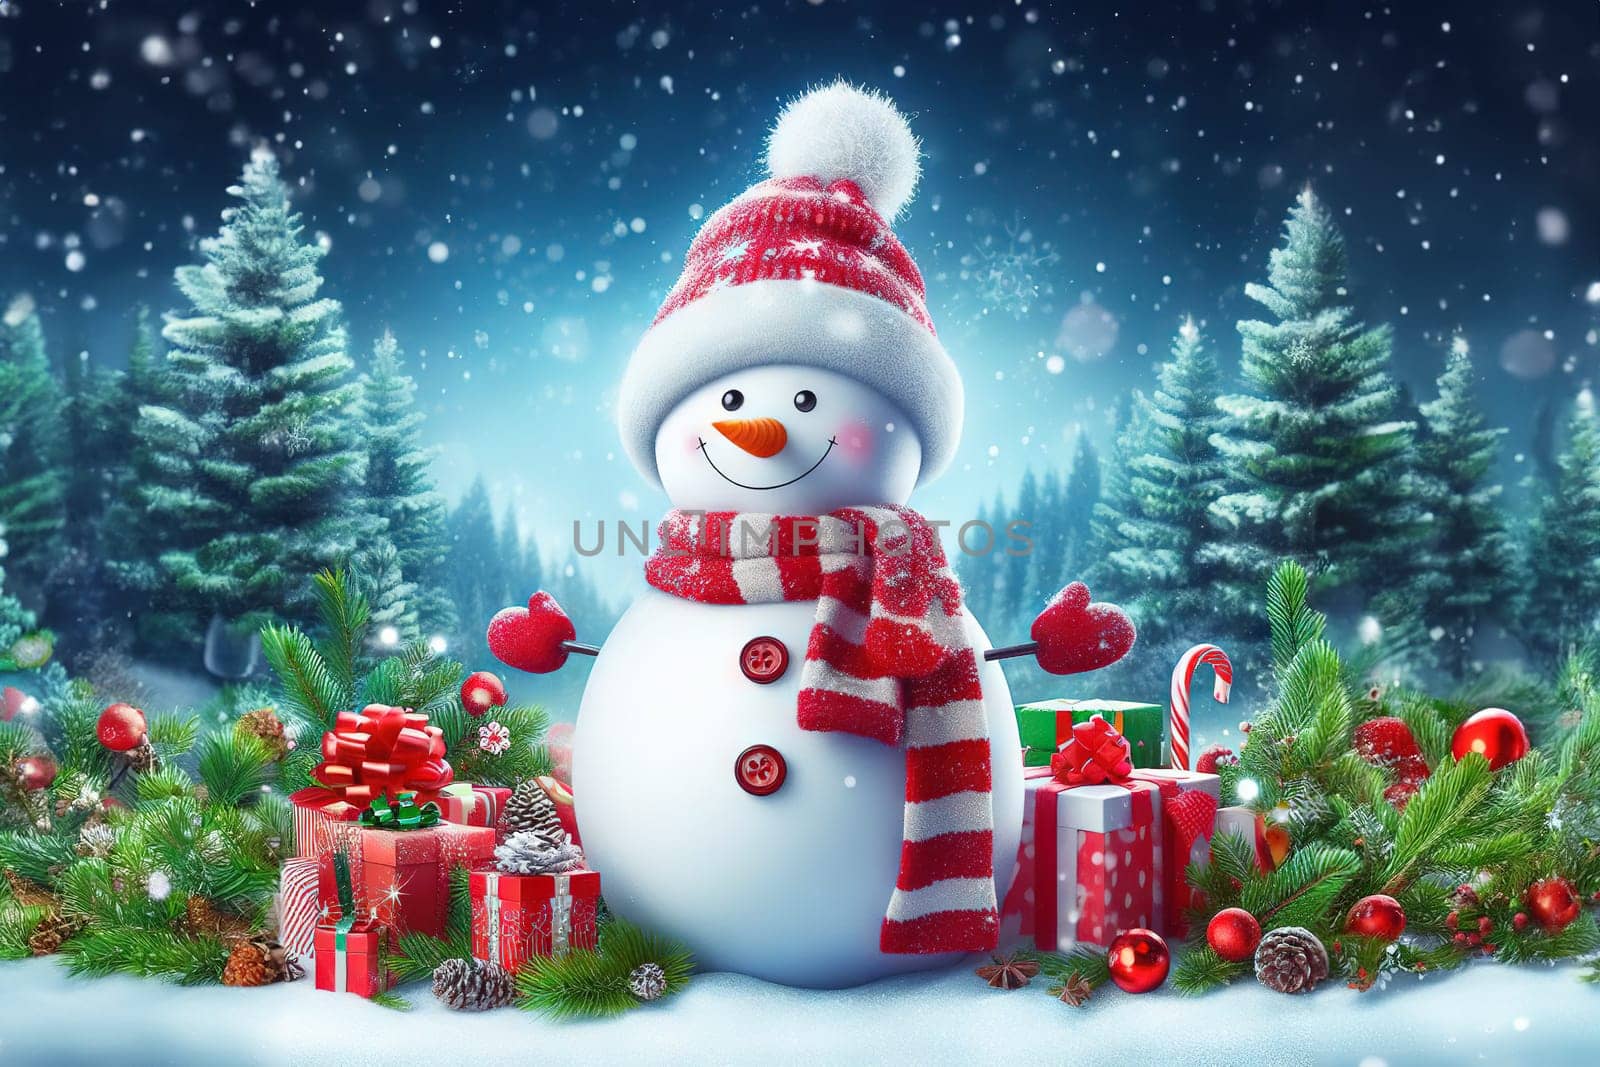 Cute snowman and snow forested landscape. Winter decoration and background by EkaterinaPereslavtseva